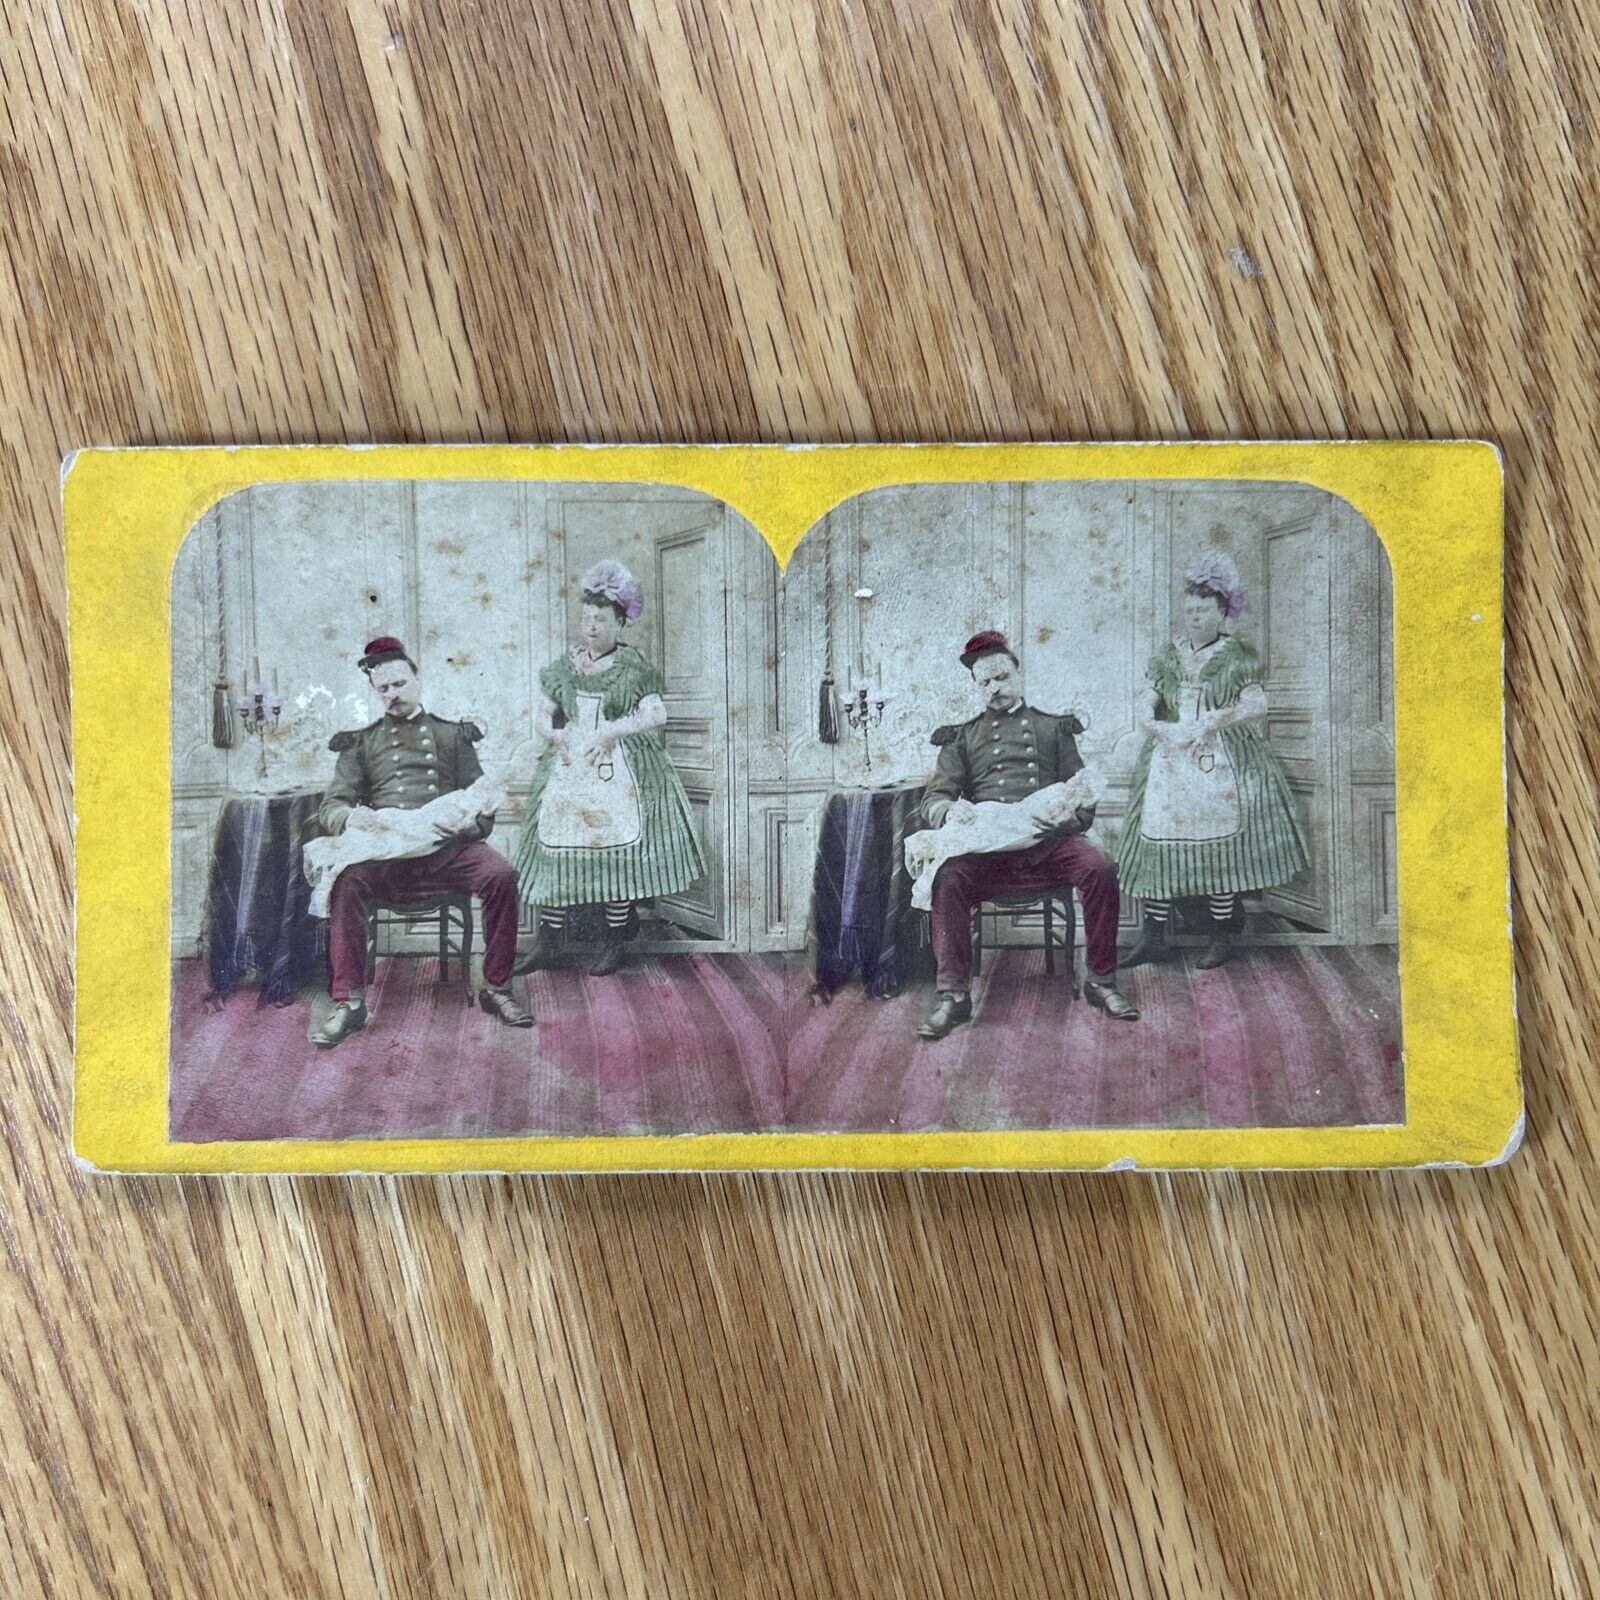 Antique Stereoscope Card Post Mortem Stereoview Parents Holding Baby Early 1878